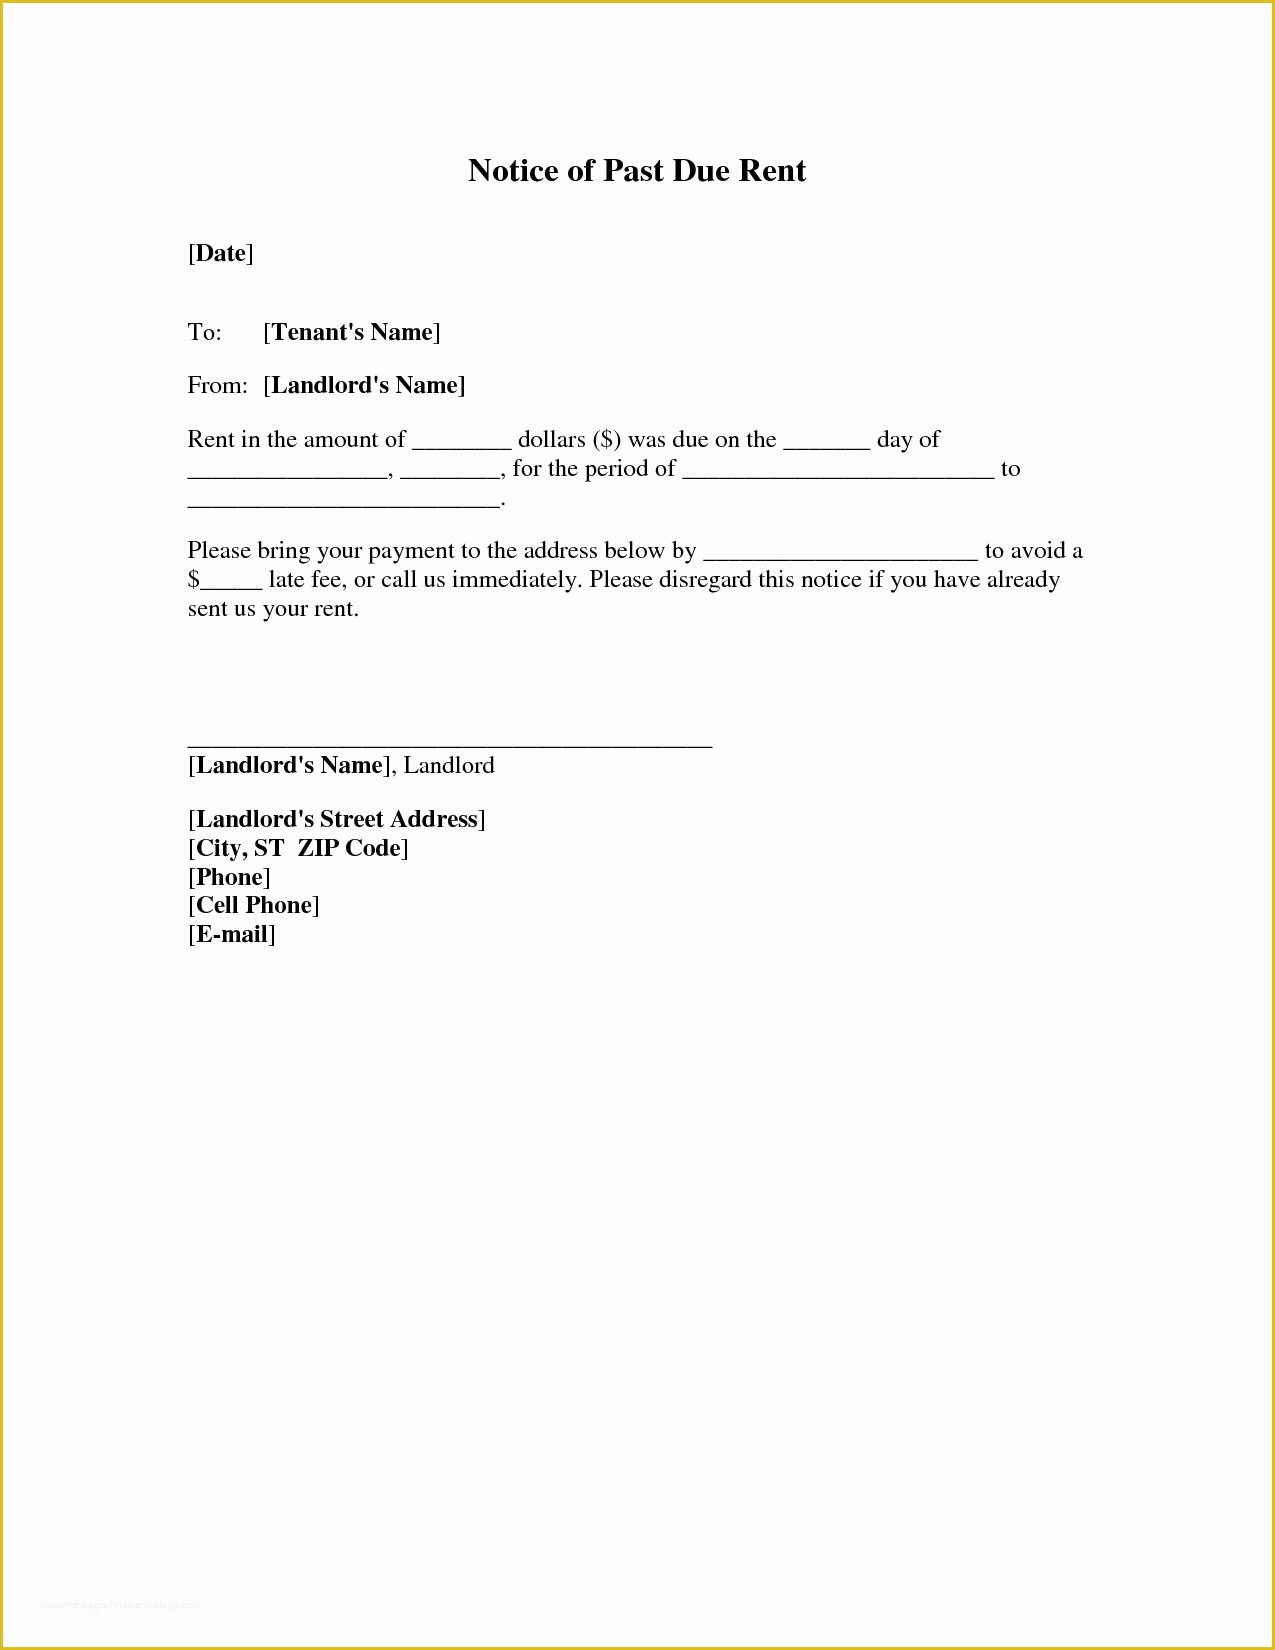 Free Past Due Letter Template Of 10 Best Of Landlord Past Due Notice Eviction